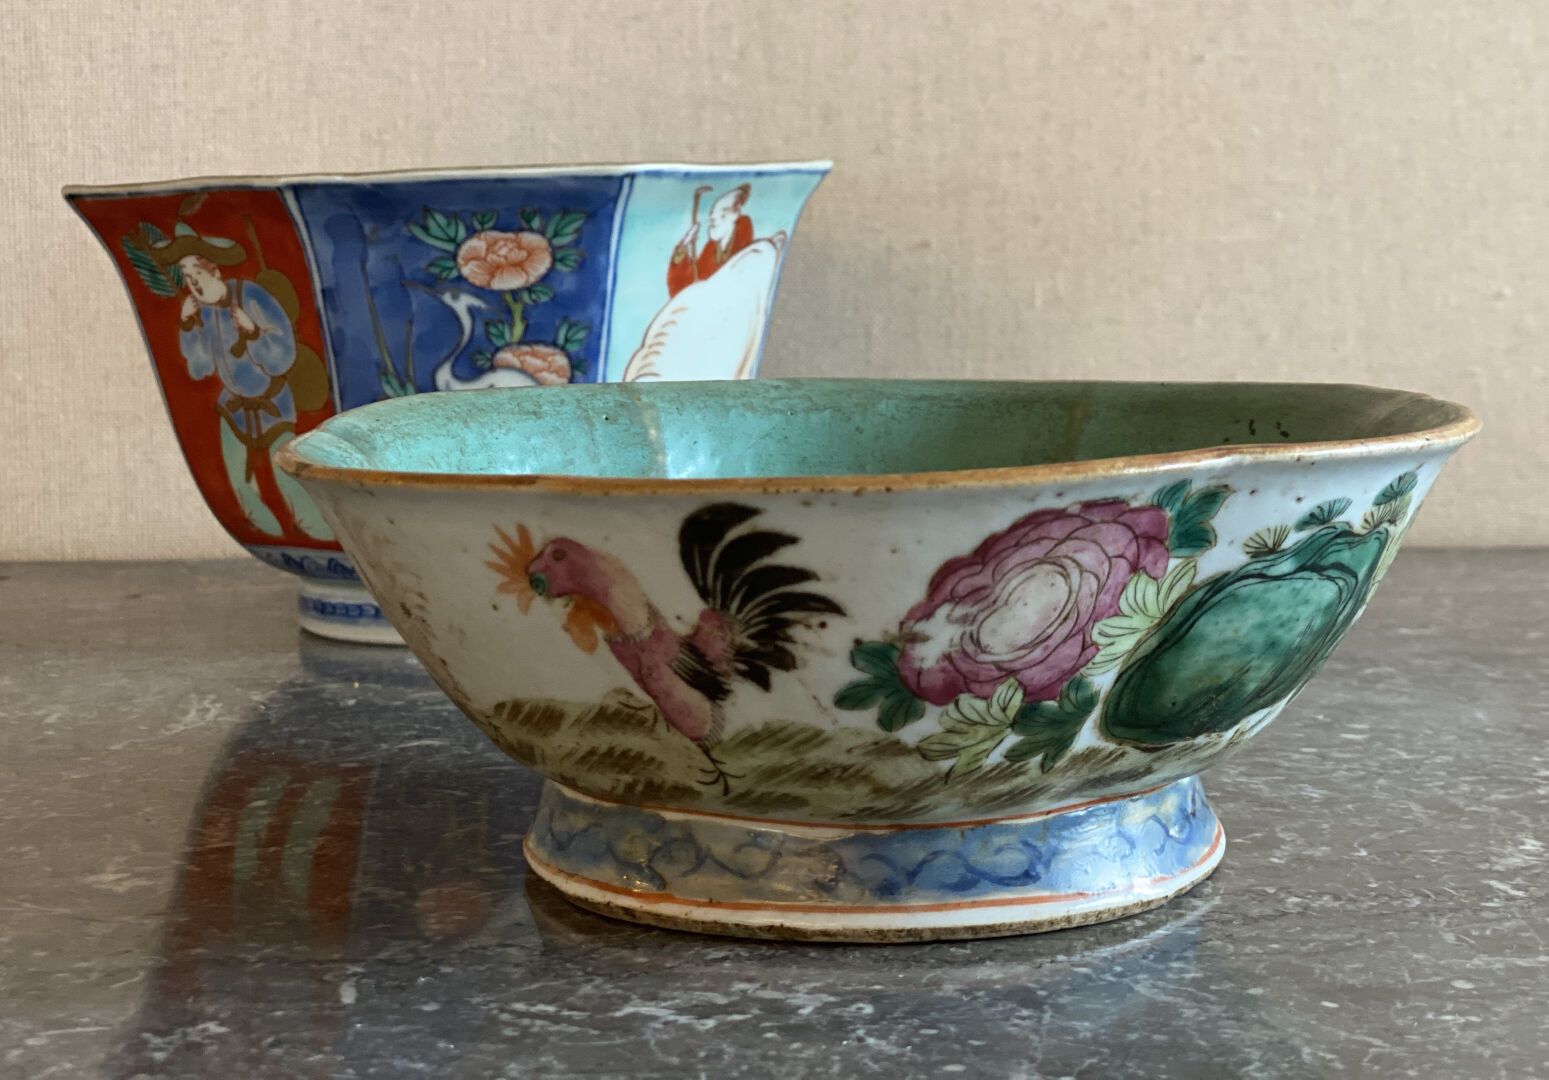 Null ASIA - EARLY 20th CENTURY

Thick porcelain bowl decorated with roosters, ro&hellip;